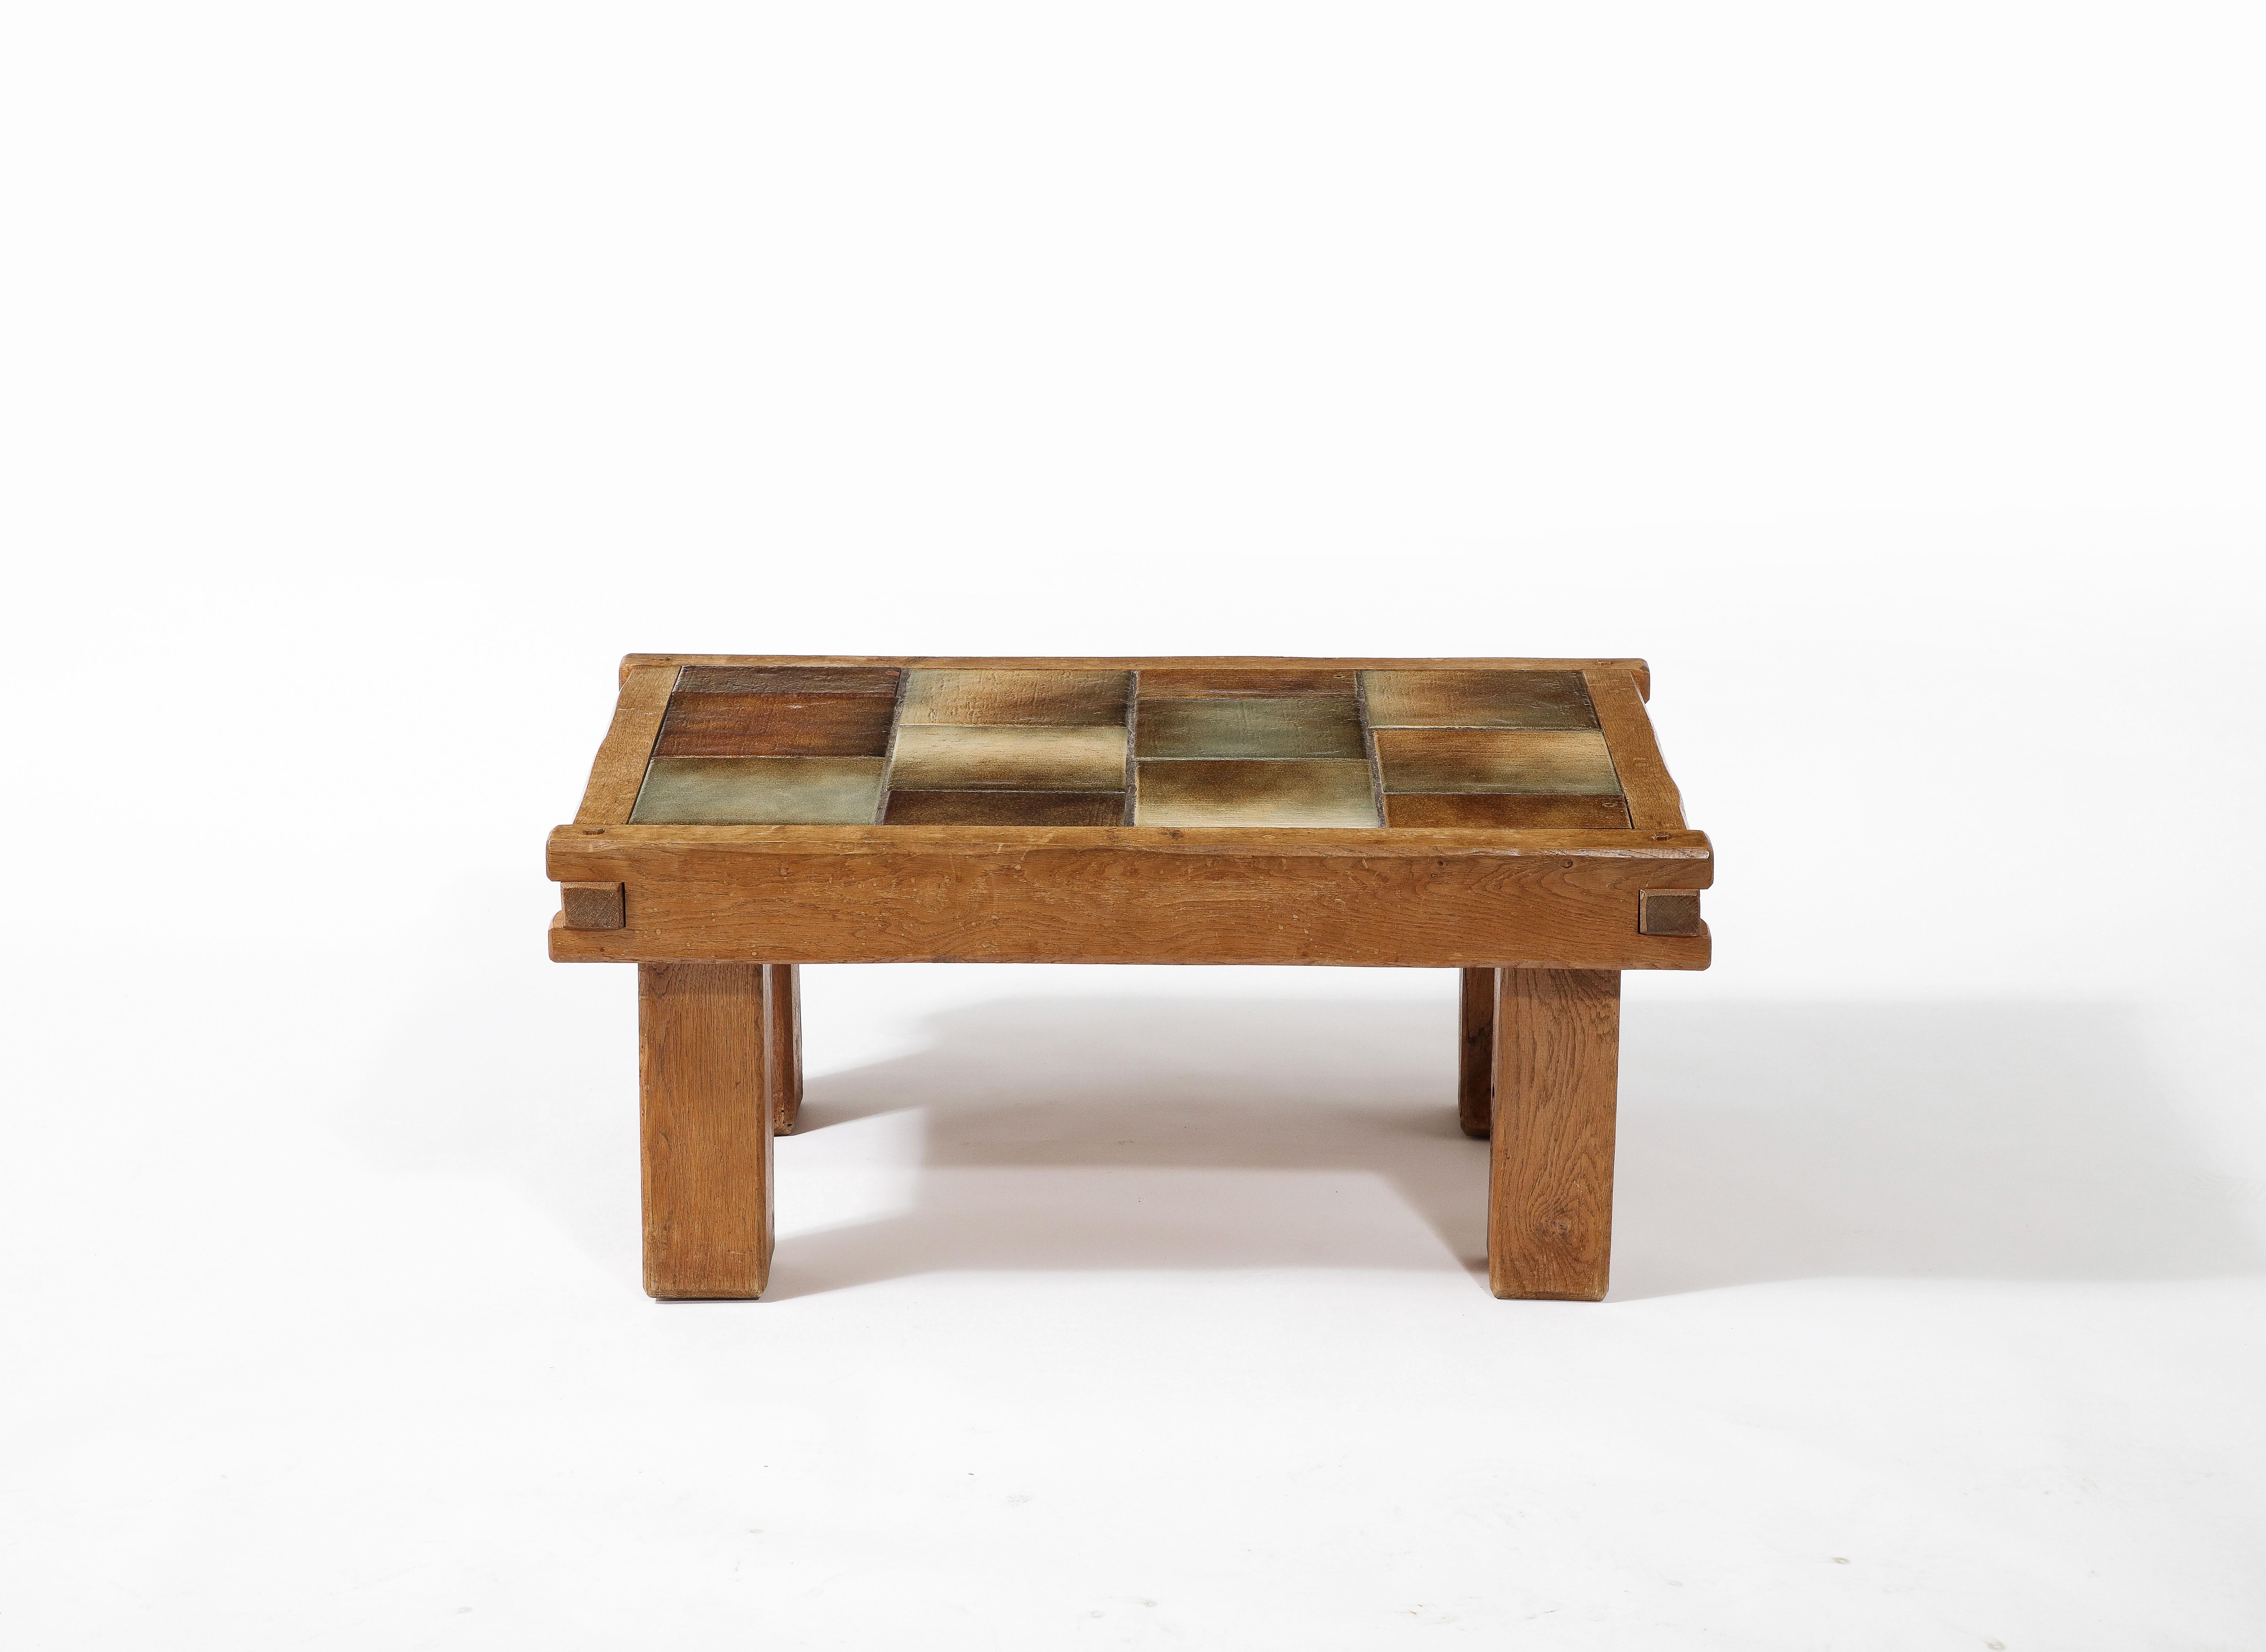 Small Brutalist Coffee Table with Ceramic Tile Top & Oak, France 1960's For Sale 4